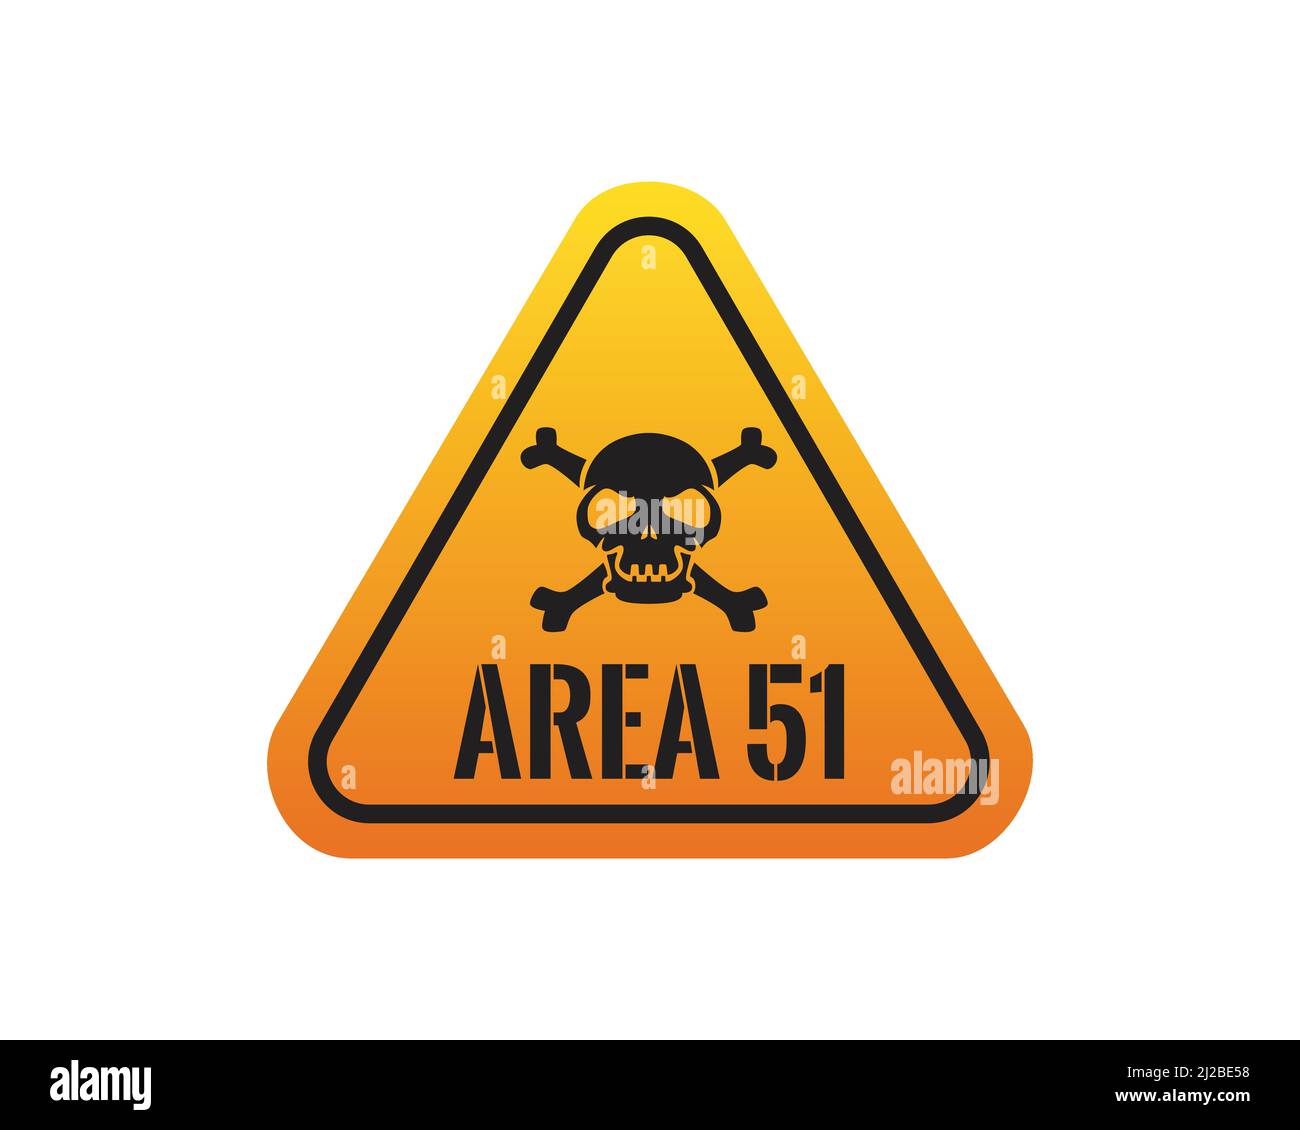 Area 51 Danger Combined with Skull Symbol Signboard Stock Vector